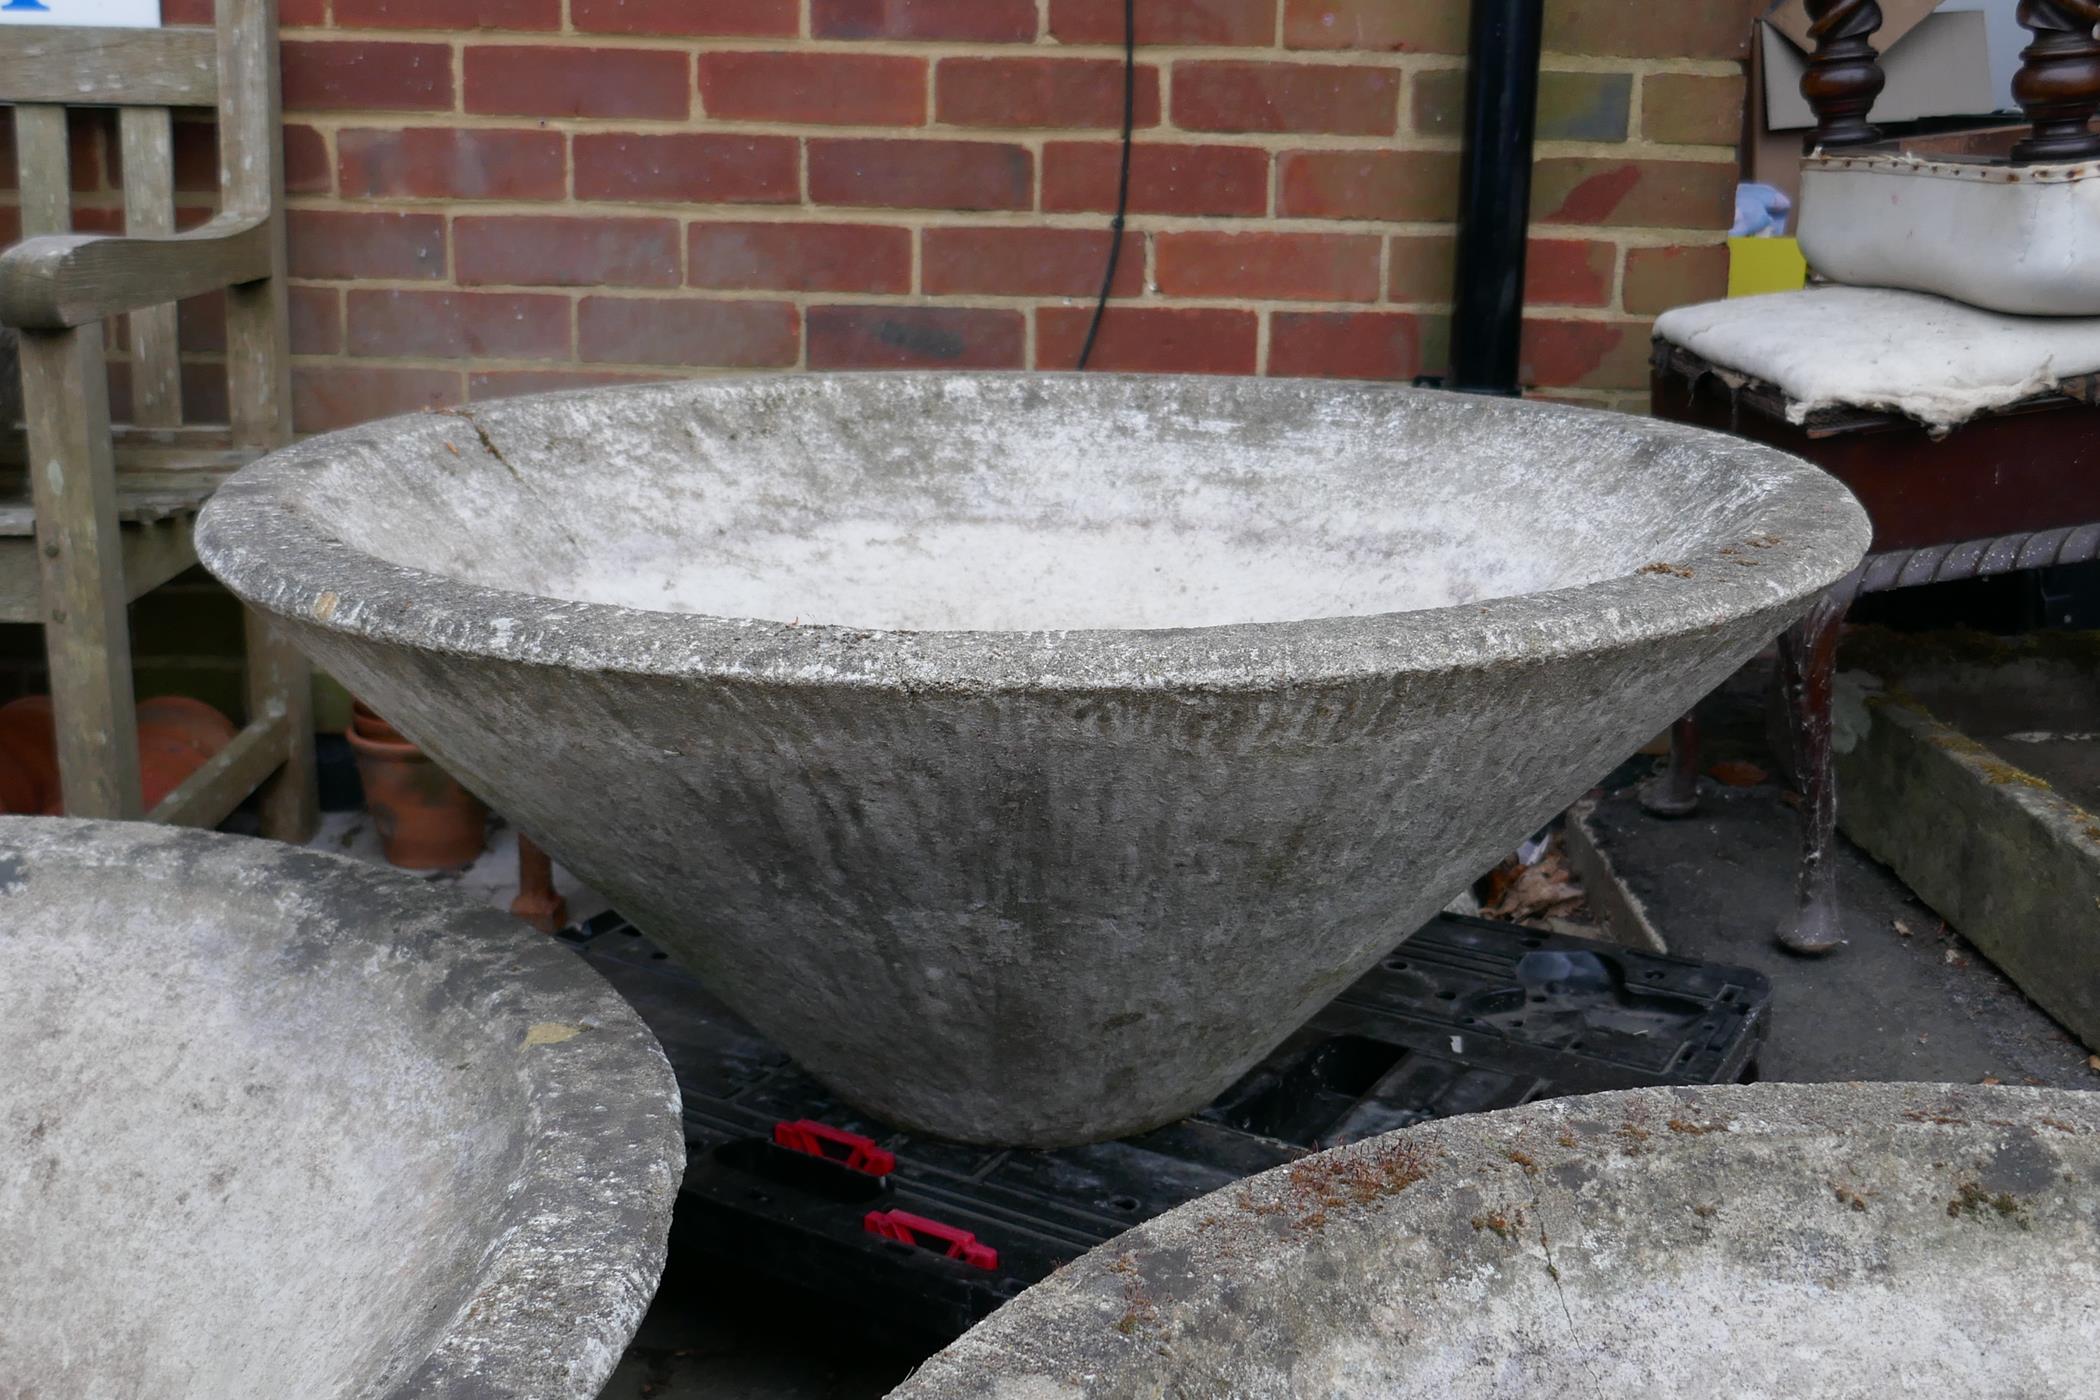 Three mid century conical concrete garden planters with bark effect exterior, 35" diameter - Image 4 of 6